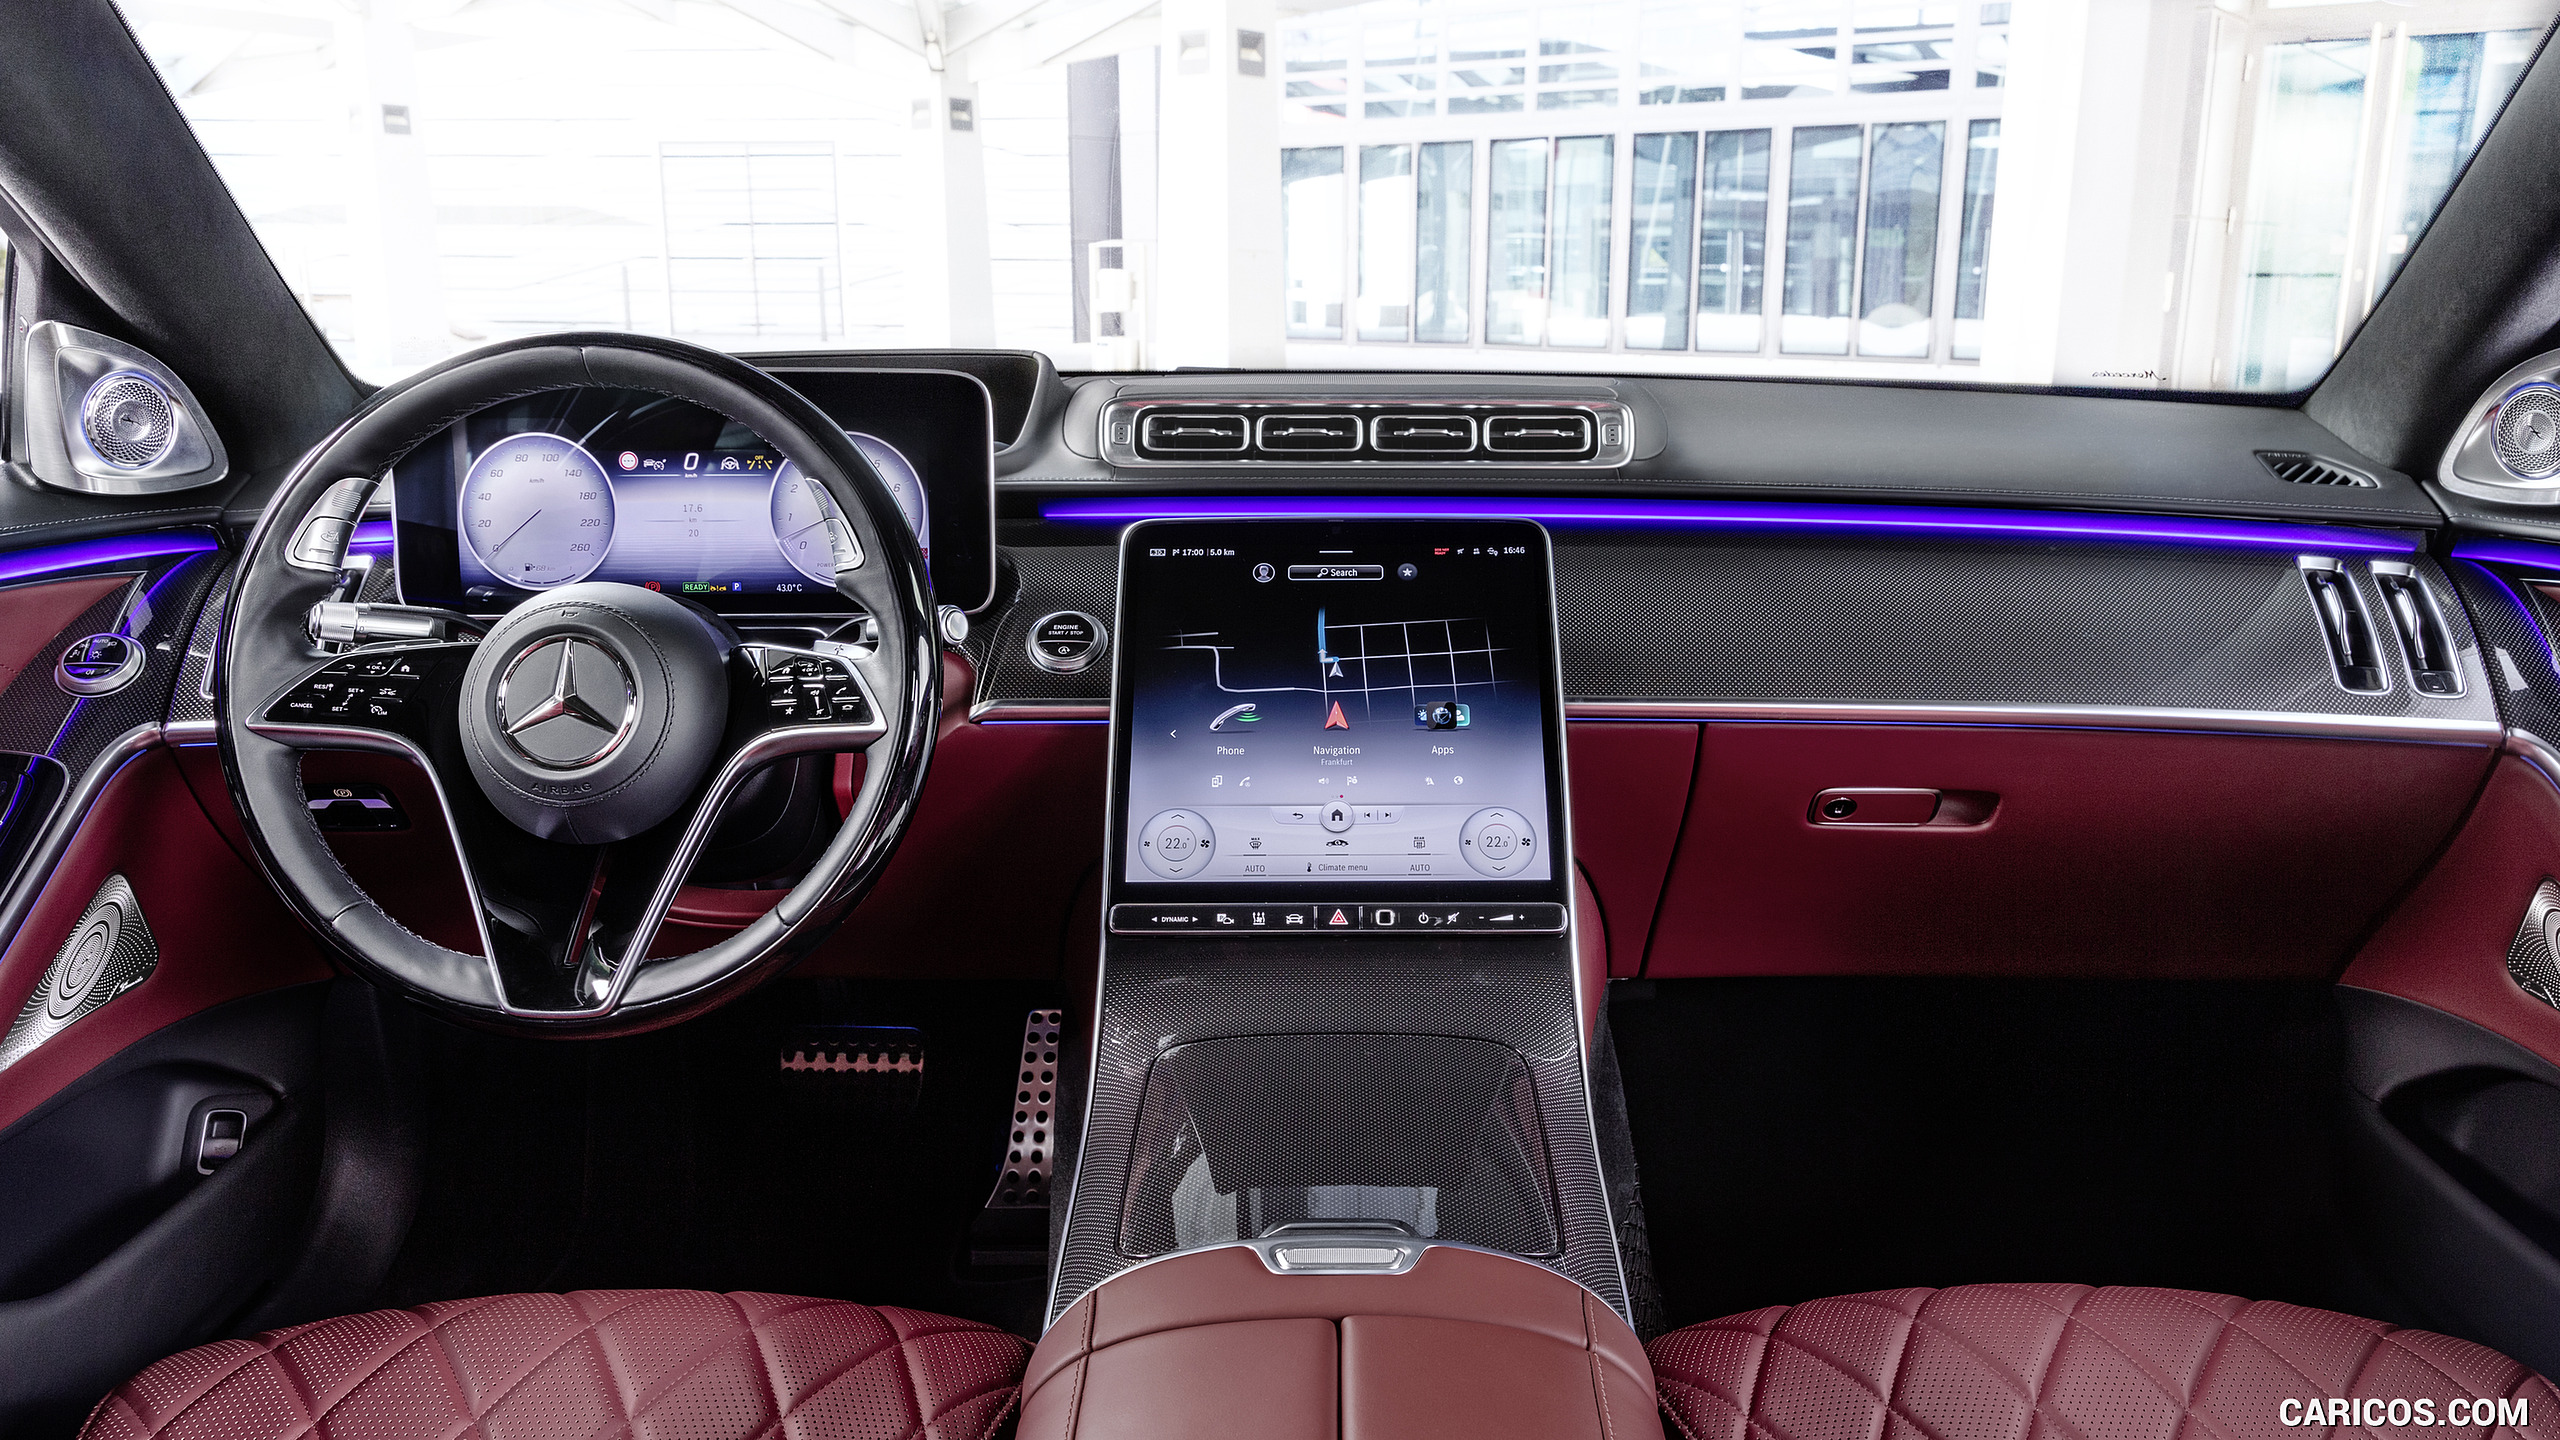 2021 Mercedes-Benz S-Class (Color: Leather Nappa Black/Carmin Red) - Interior, Cockpit, #39 of 316